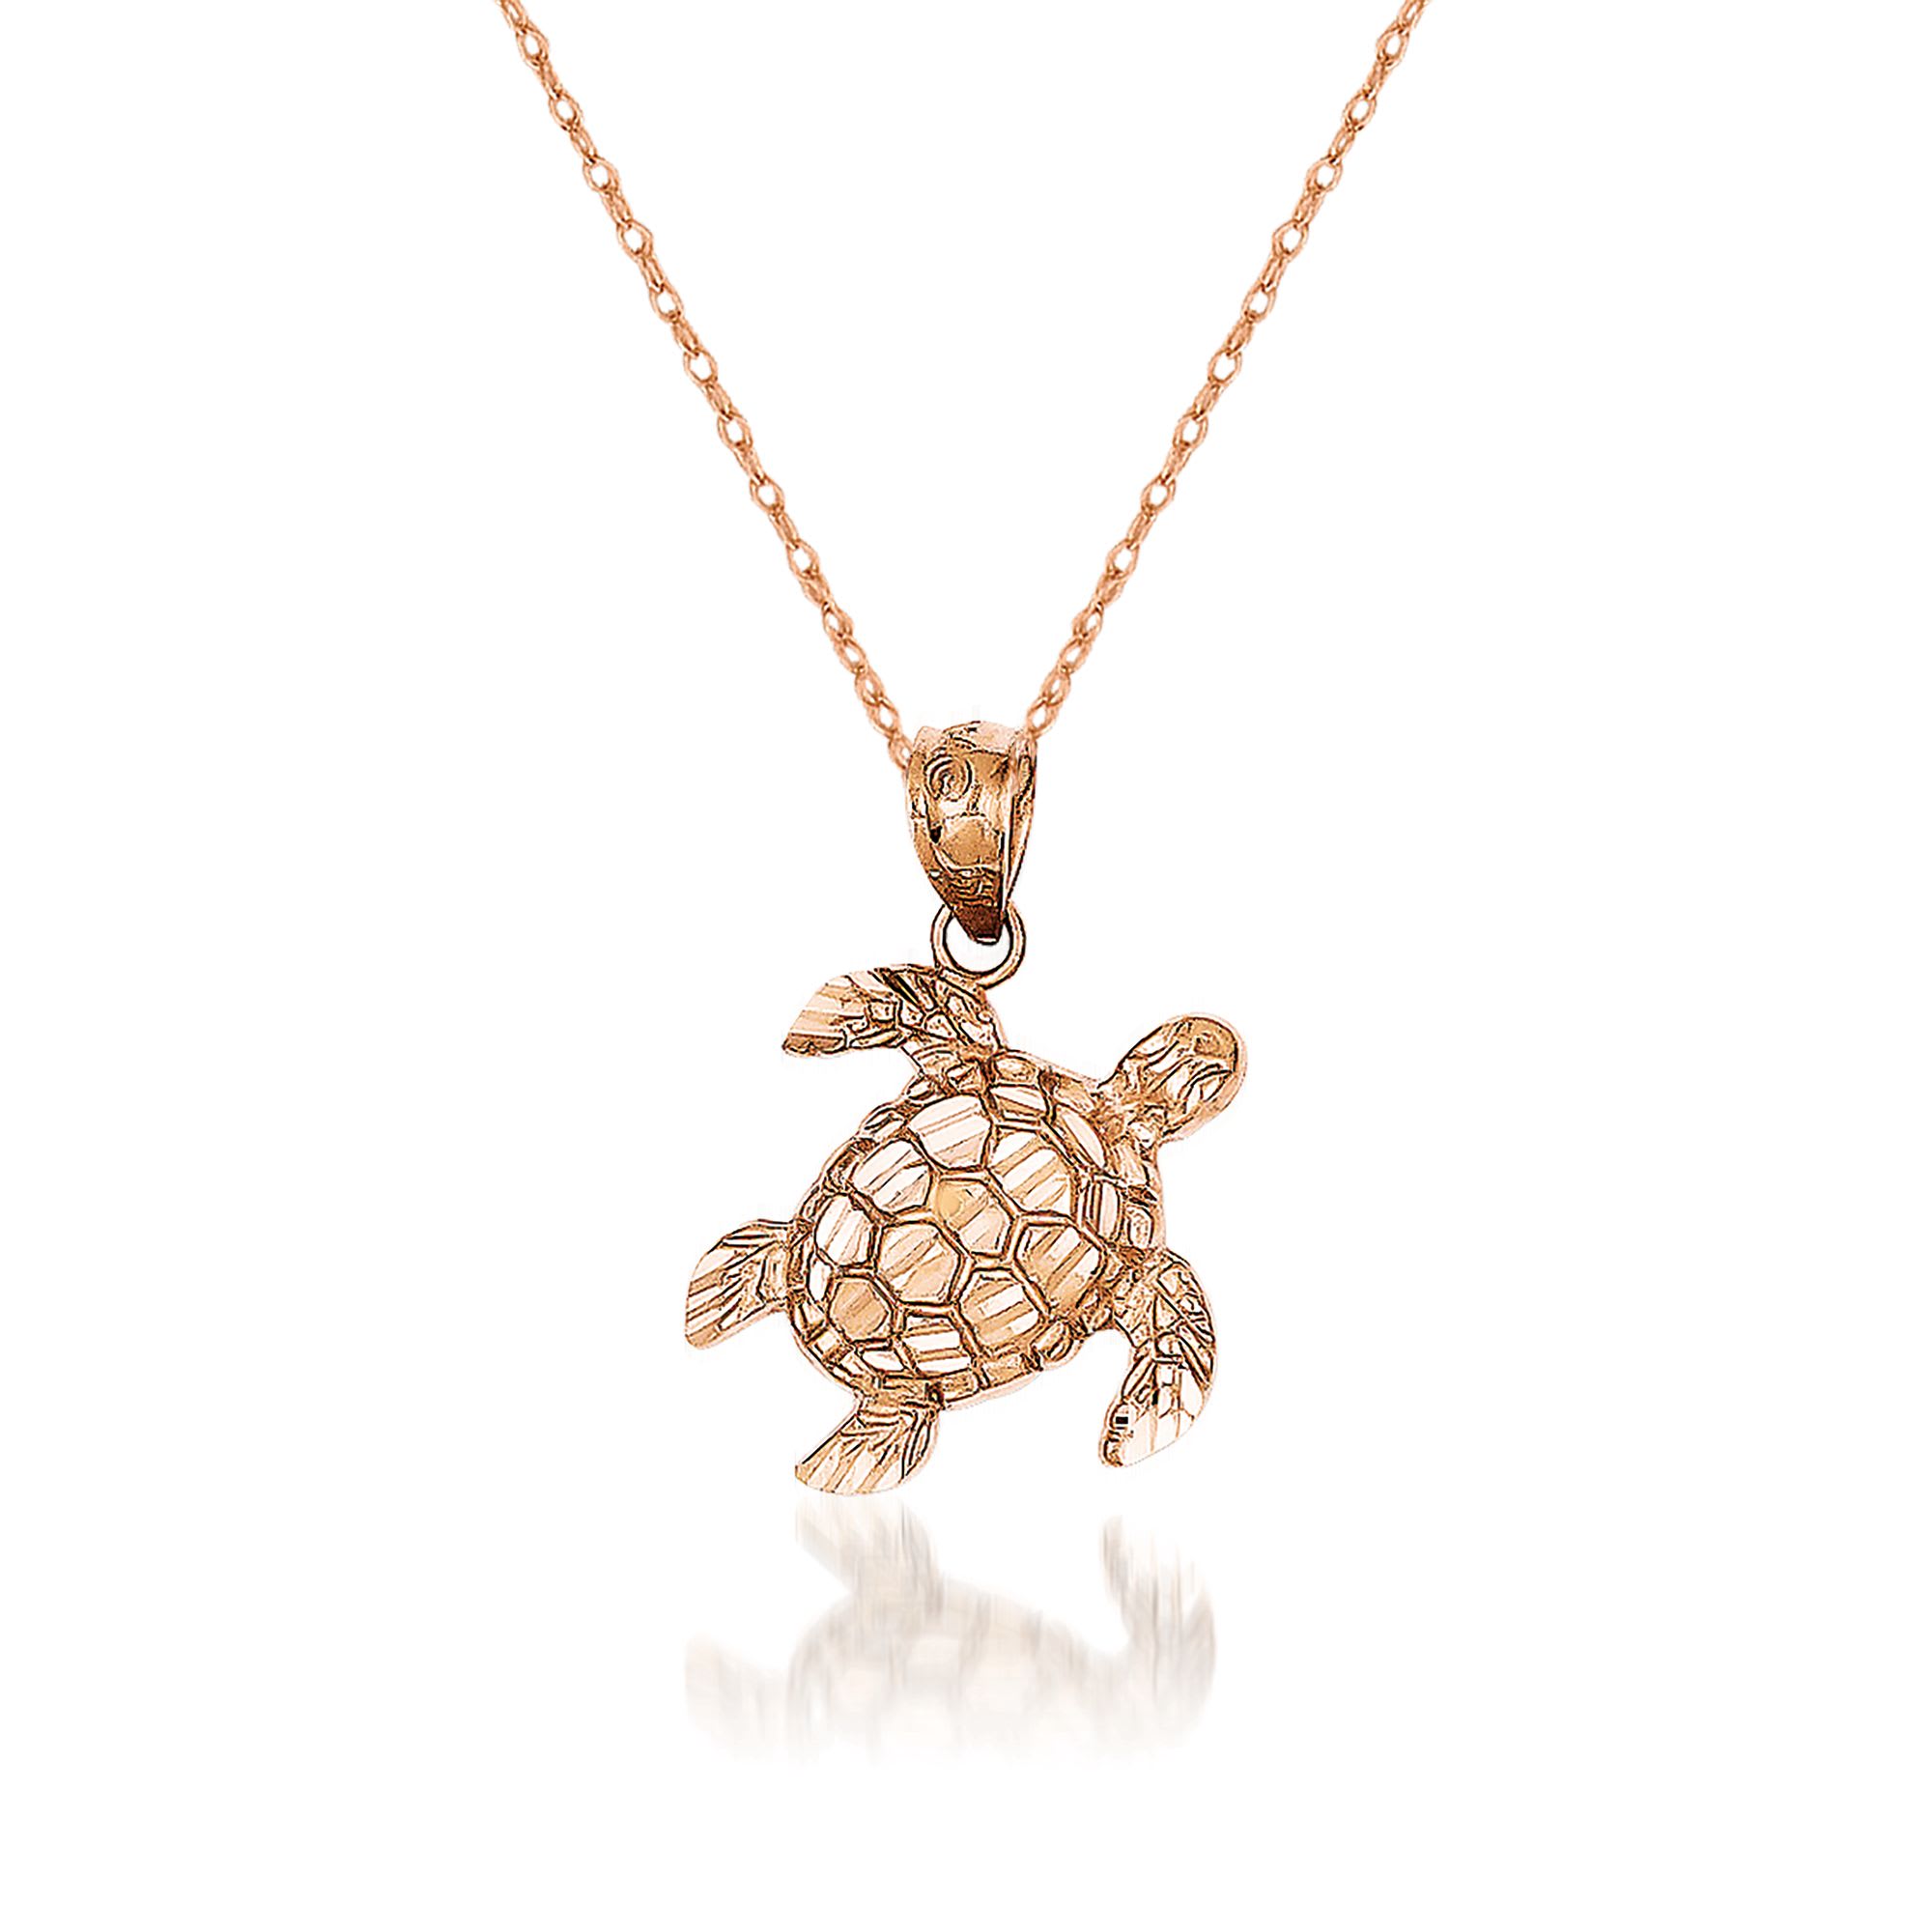 14K Gold Plated Cute Turtle Pendant & Chain. Animal Necklace Women Jewelry  Gift. | eBay